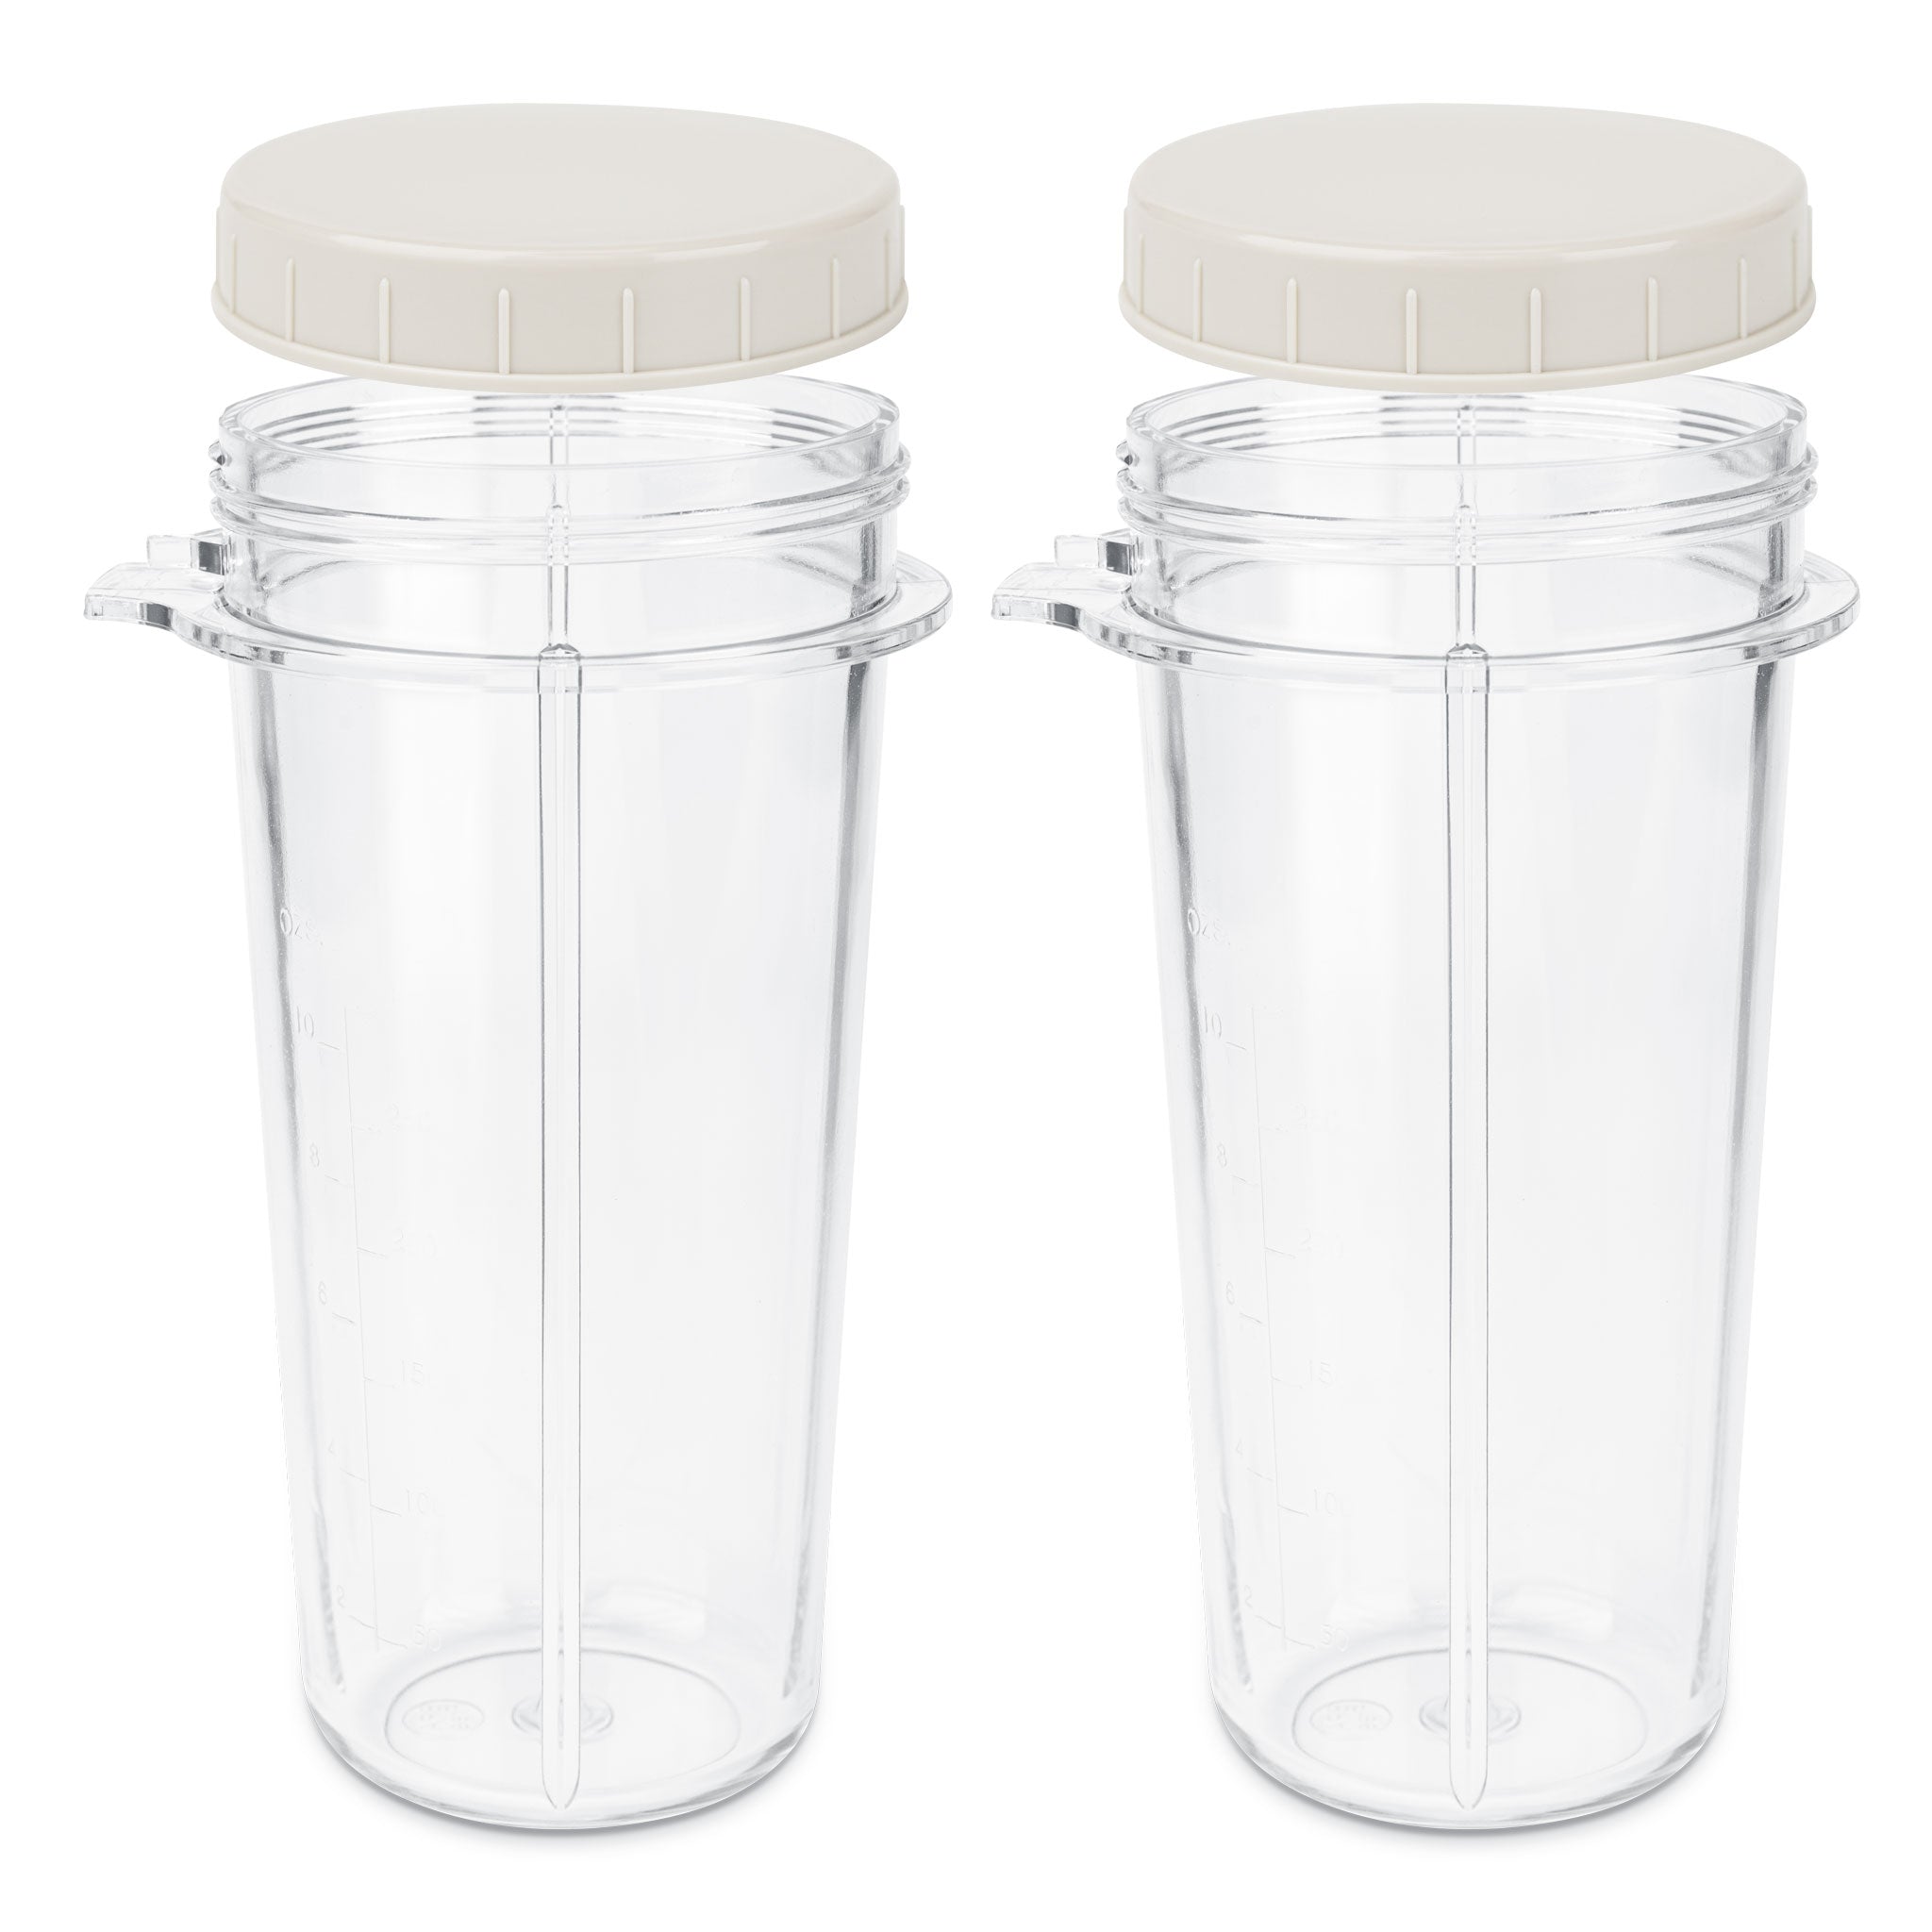 Personal Blender® BPA-Free Blending Cups with Lids, Set of 2 (16 oz)